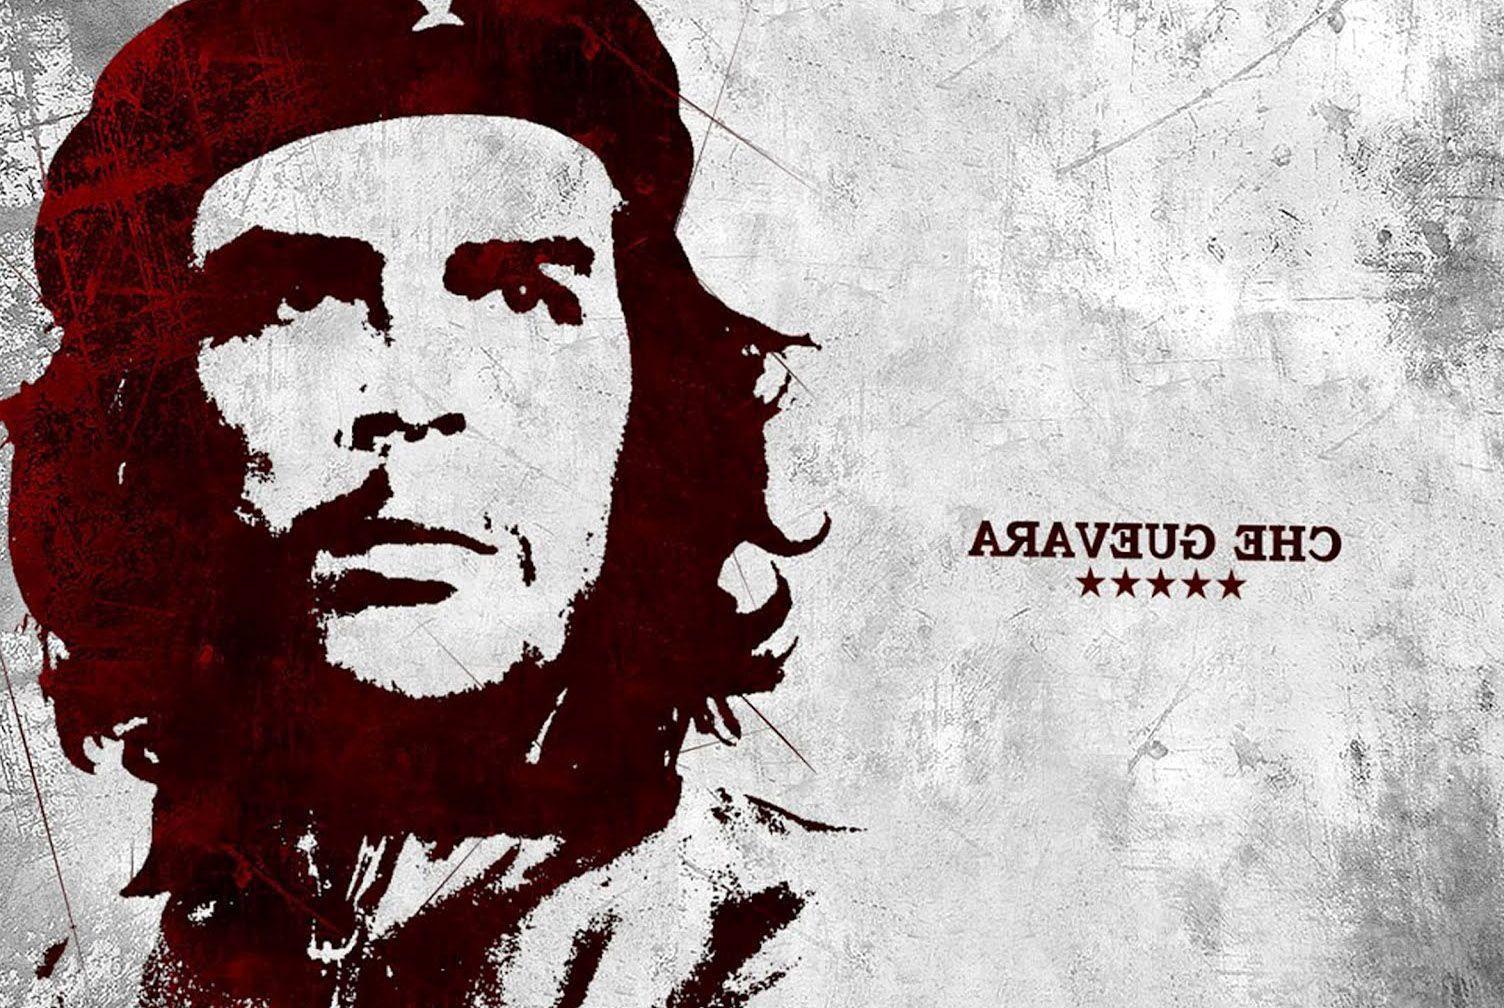 Che Guevara, Colorful, Artworks, Classic Painters, Historical Image